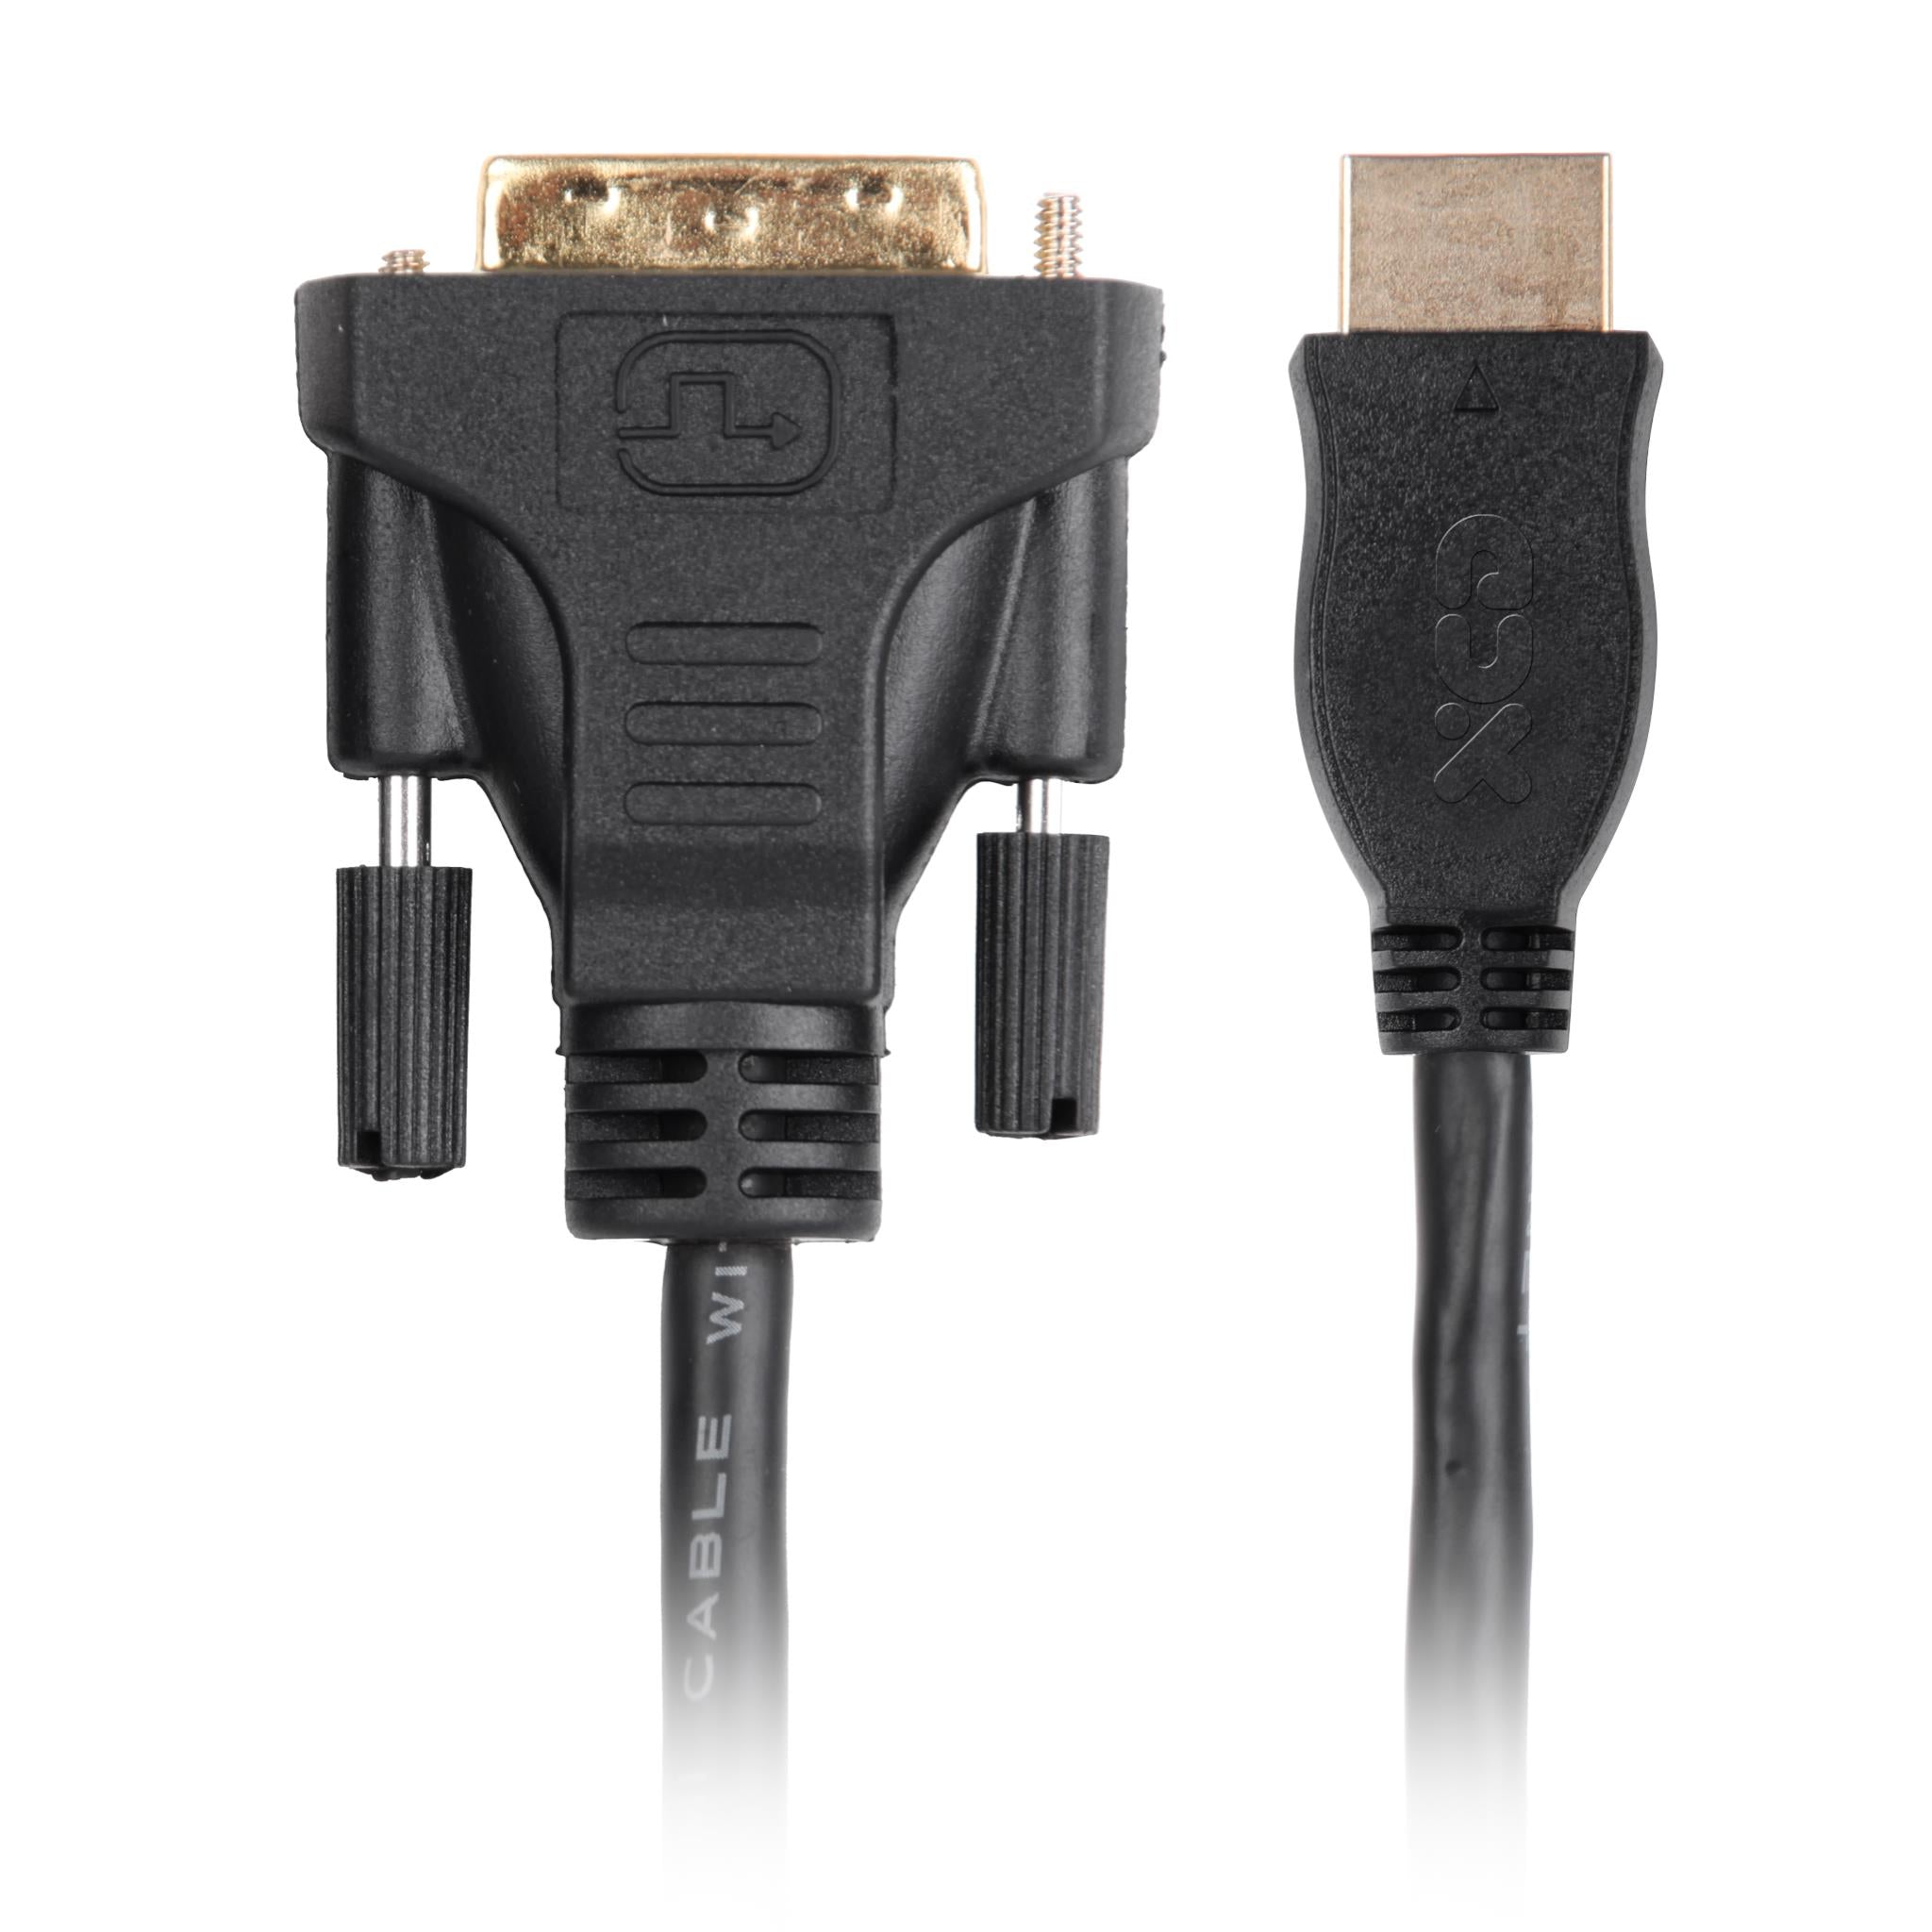 What is the difference between HDMI and DVI and which is better